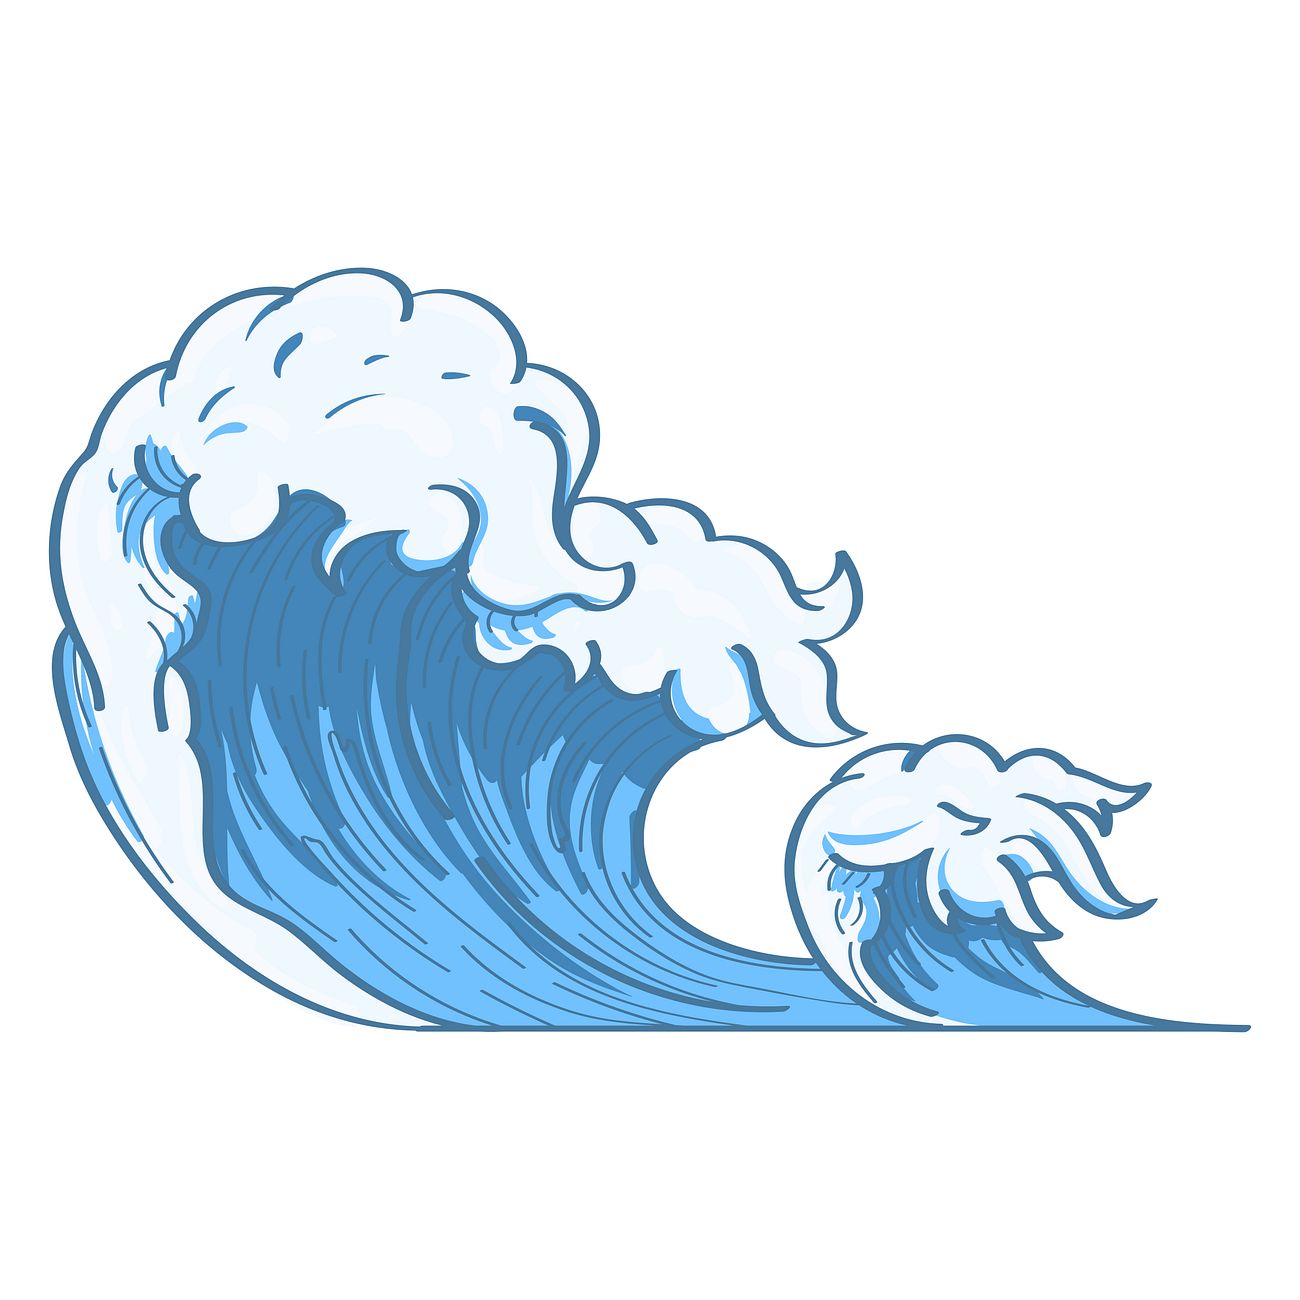 Japanese wave art doodle | Royalty free vector - 843112